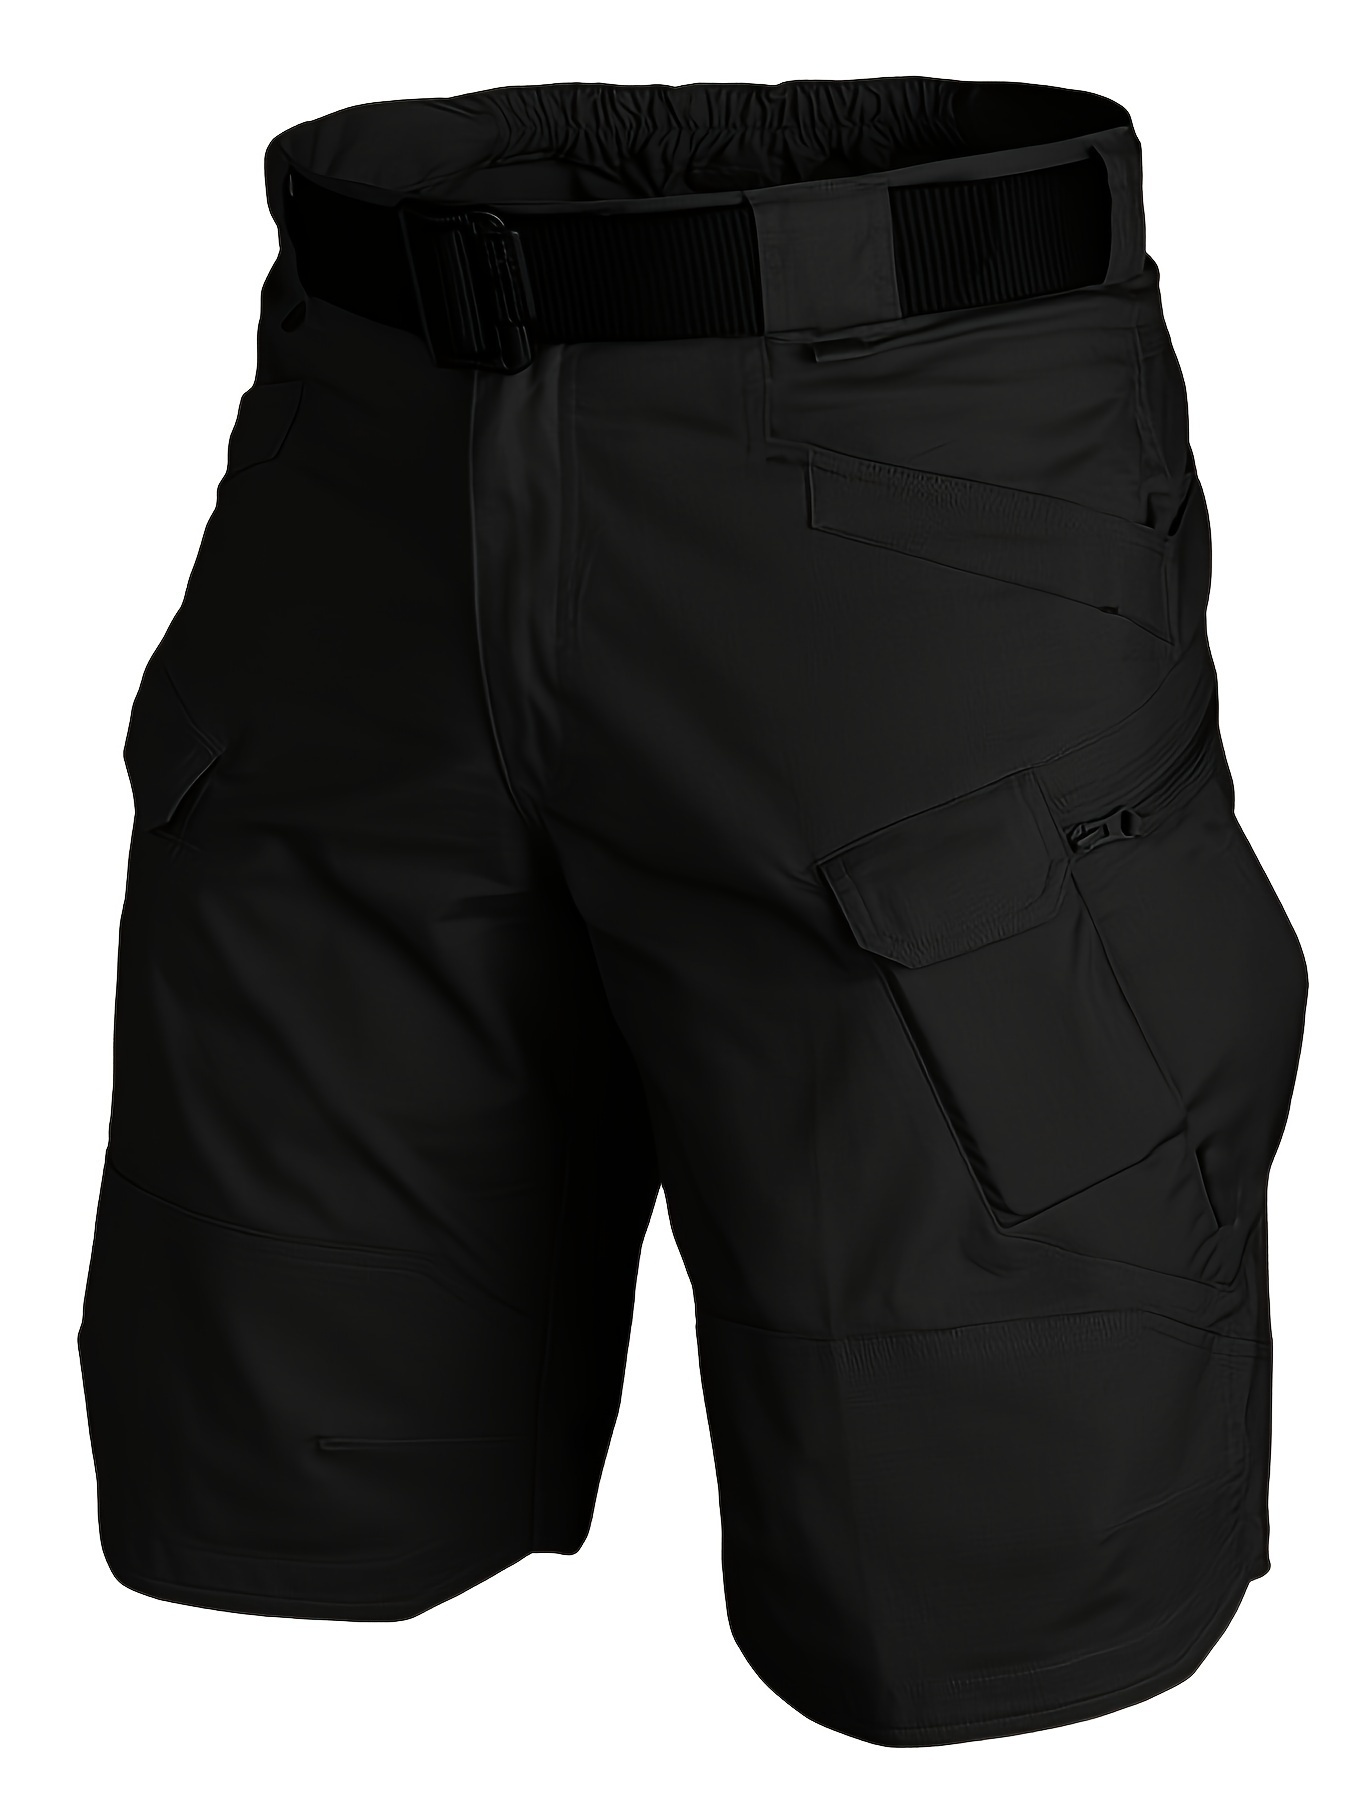 Cargo Work Pants for Men Men's Waterproof Tactical Shorts Outdoor Cargo  Shorts, Lightweight Quick Dry Breathable Hiking Fishing Cargo Shorts Black Cargo  Pants Mens Shorts Size 34 Work for Relaxed Fit 